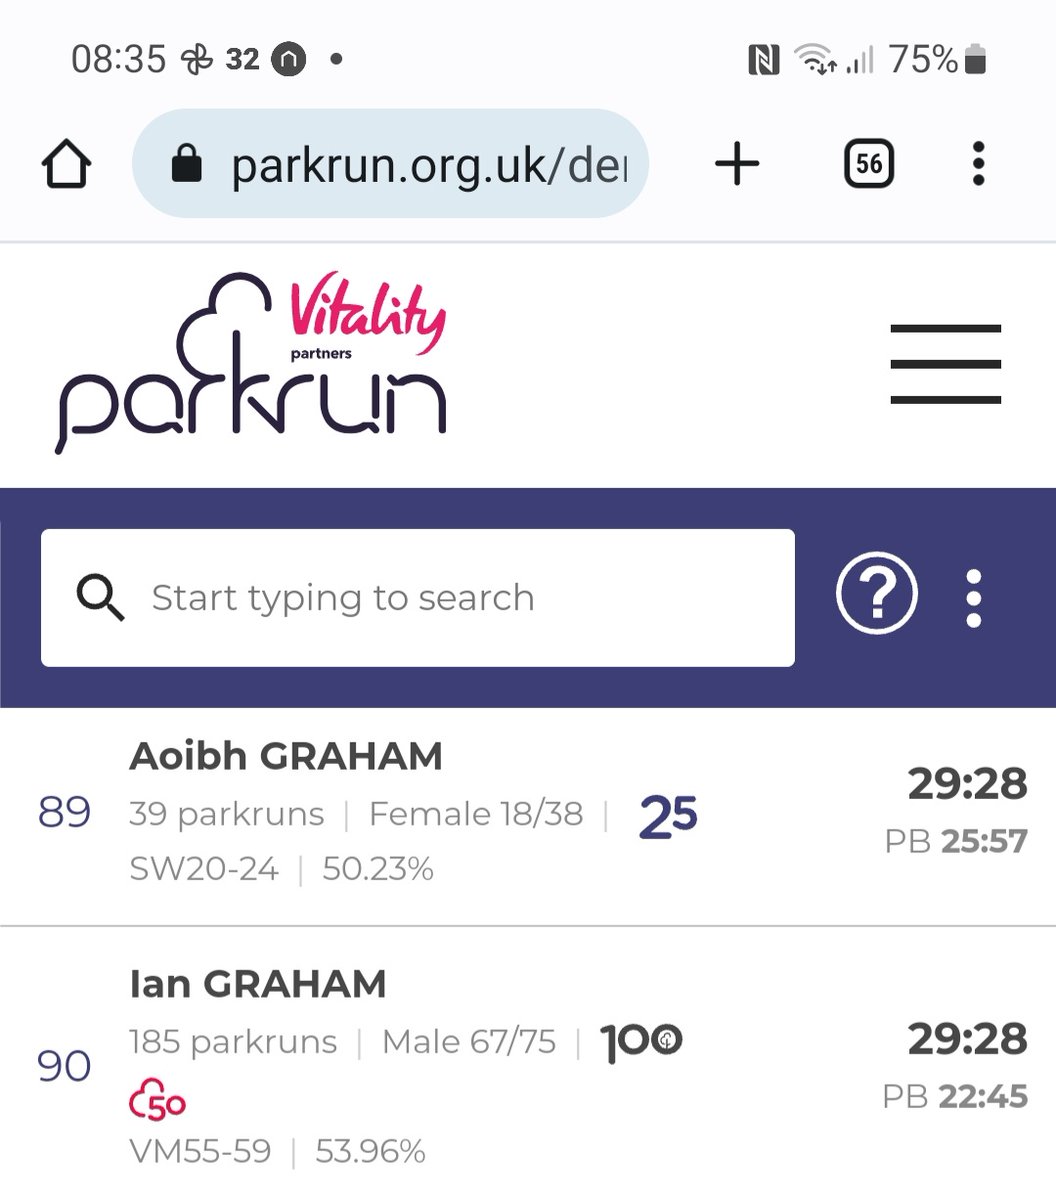 Slow one on the @derryparkrun today. Aoibh's first run in ages so took it nice and easy.